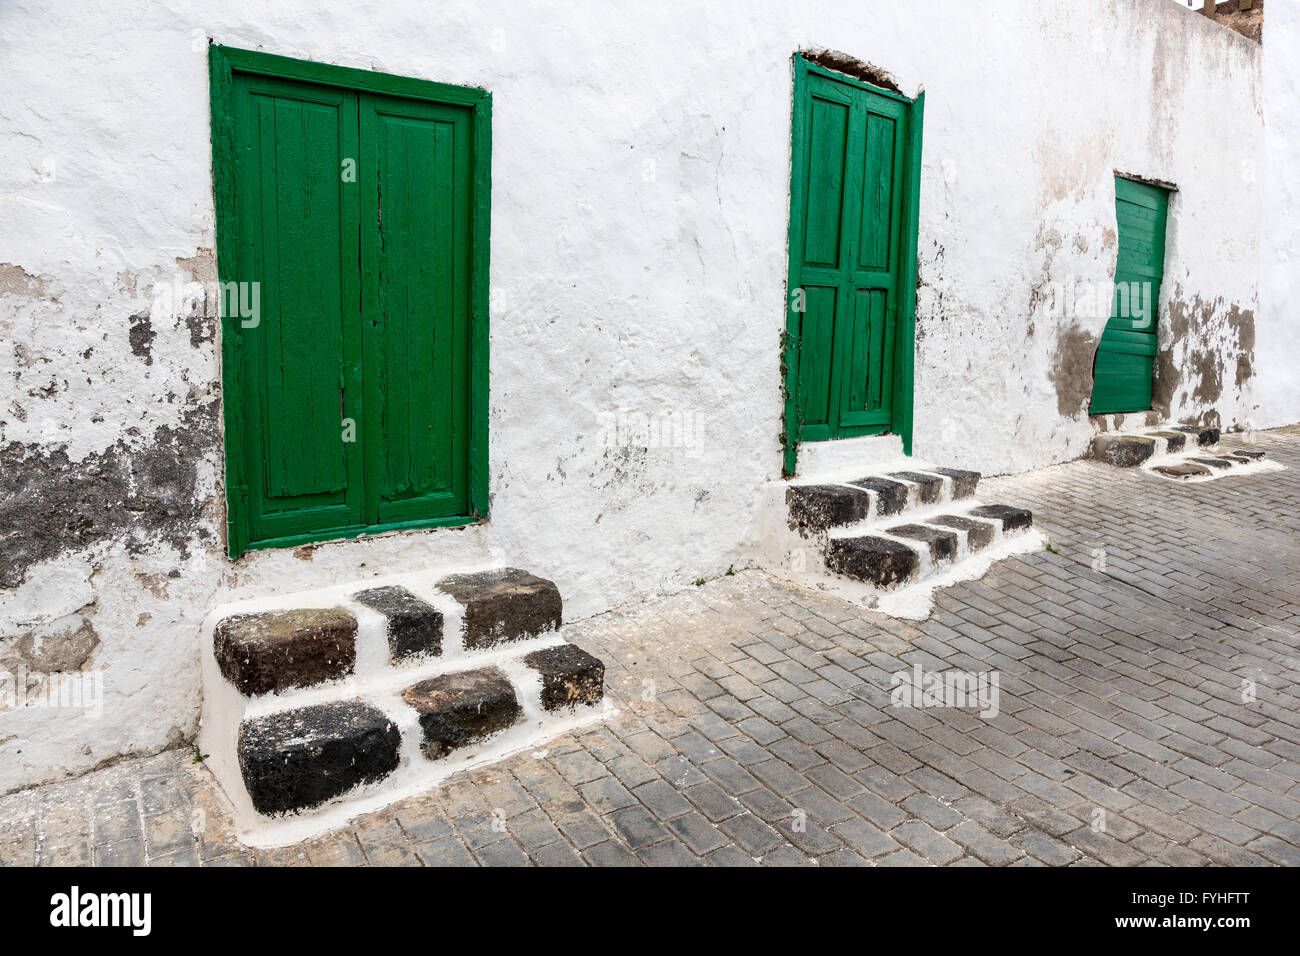 Green doors and steps in street, Tequise, Lanzarote, Canary Islands, Spain Stock Photo